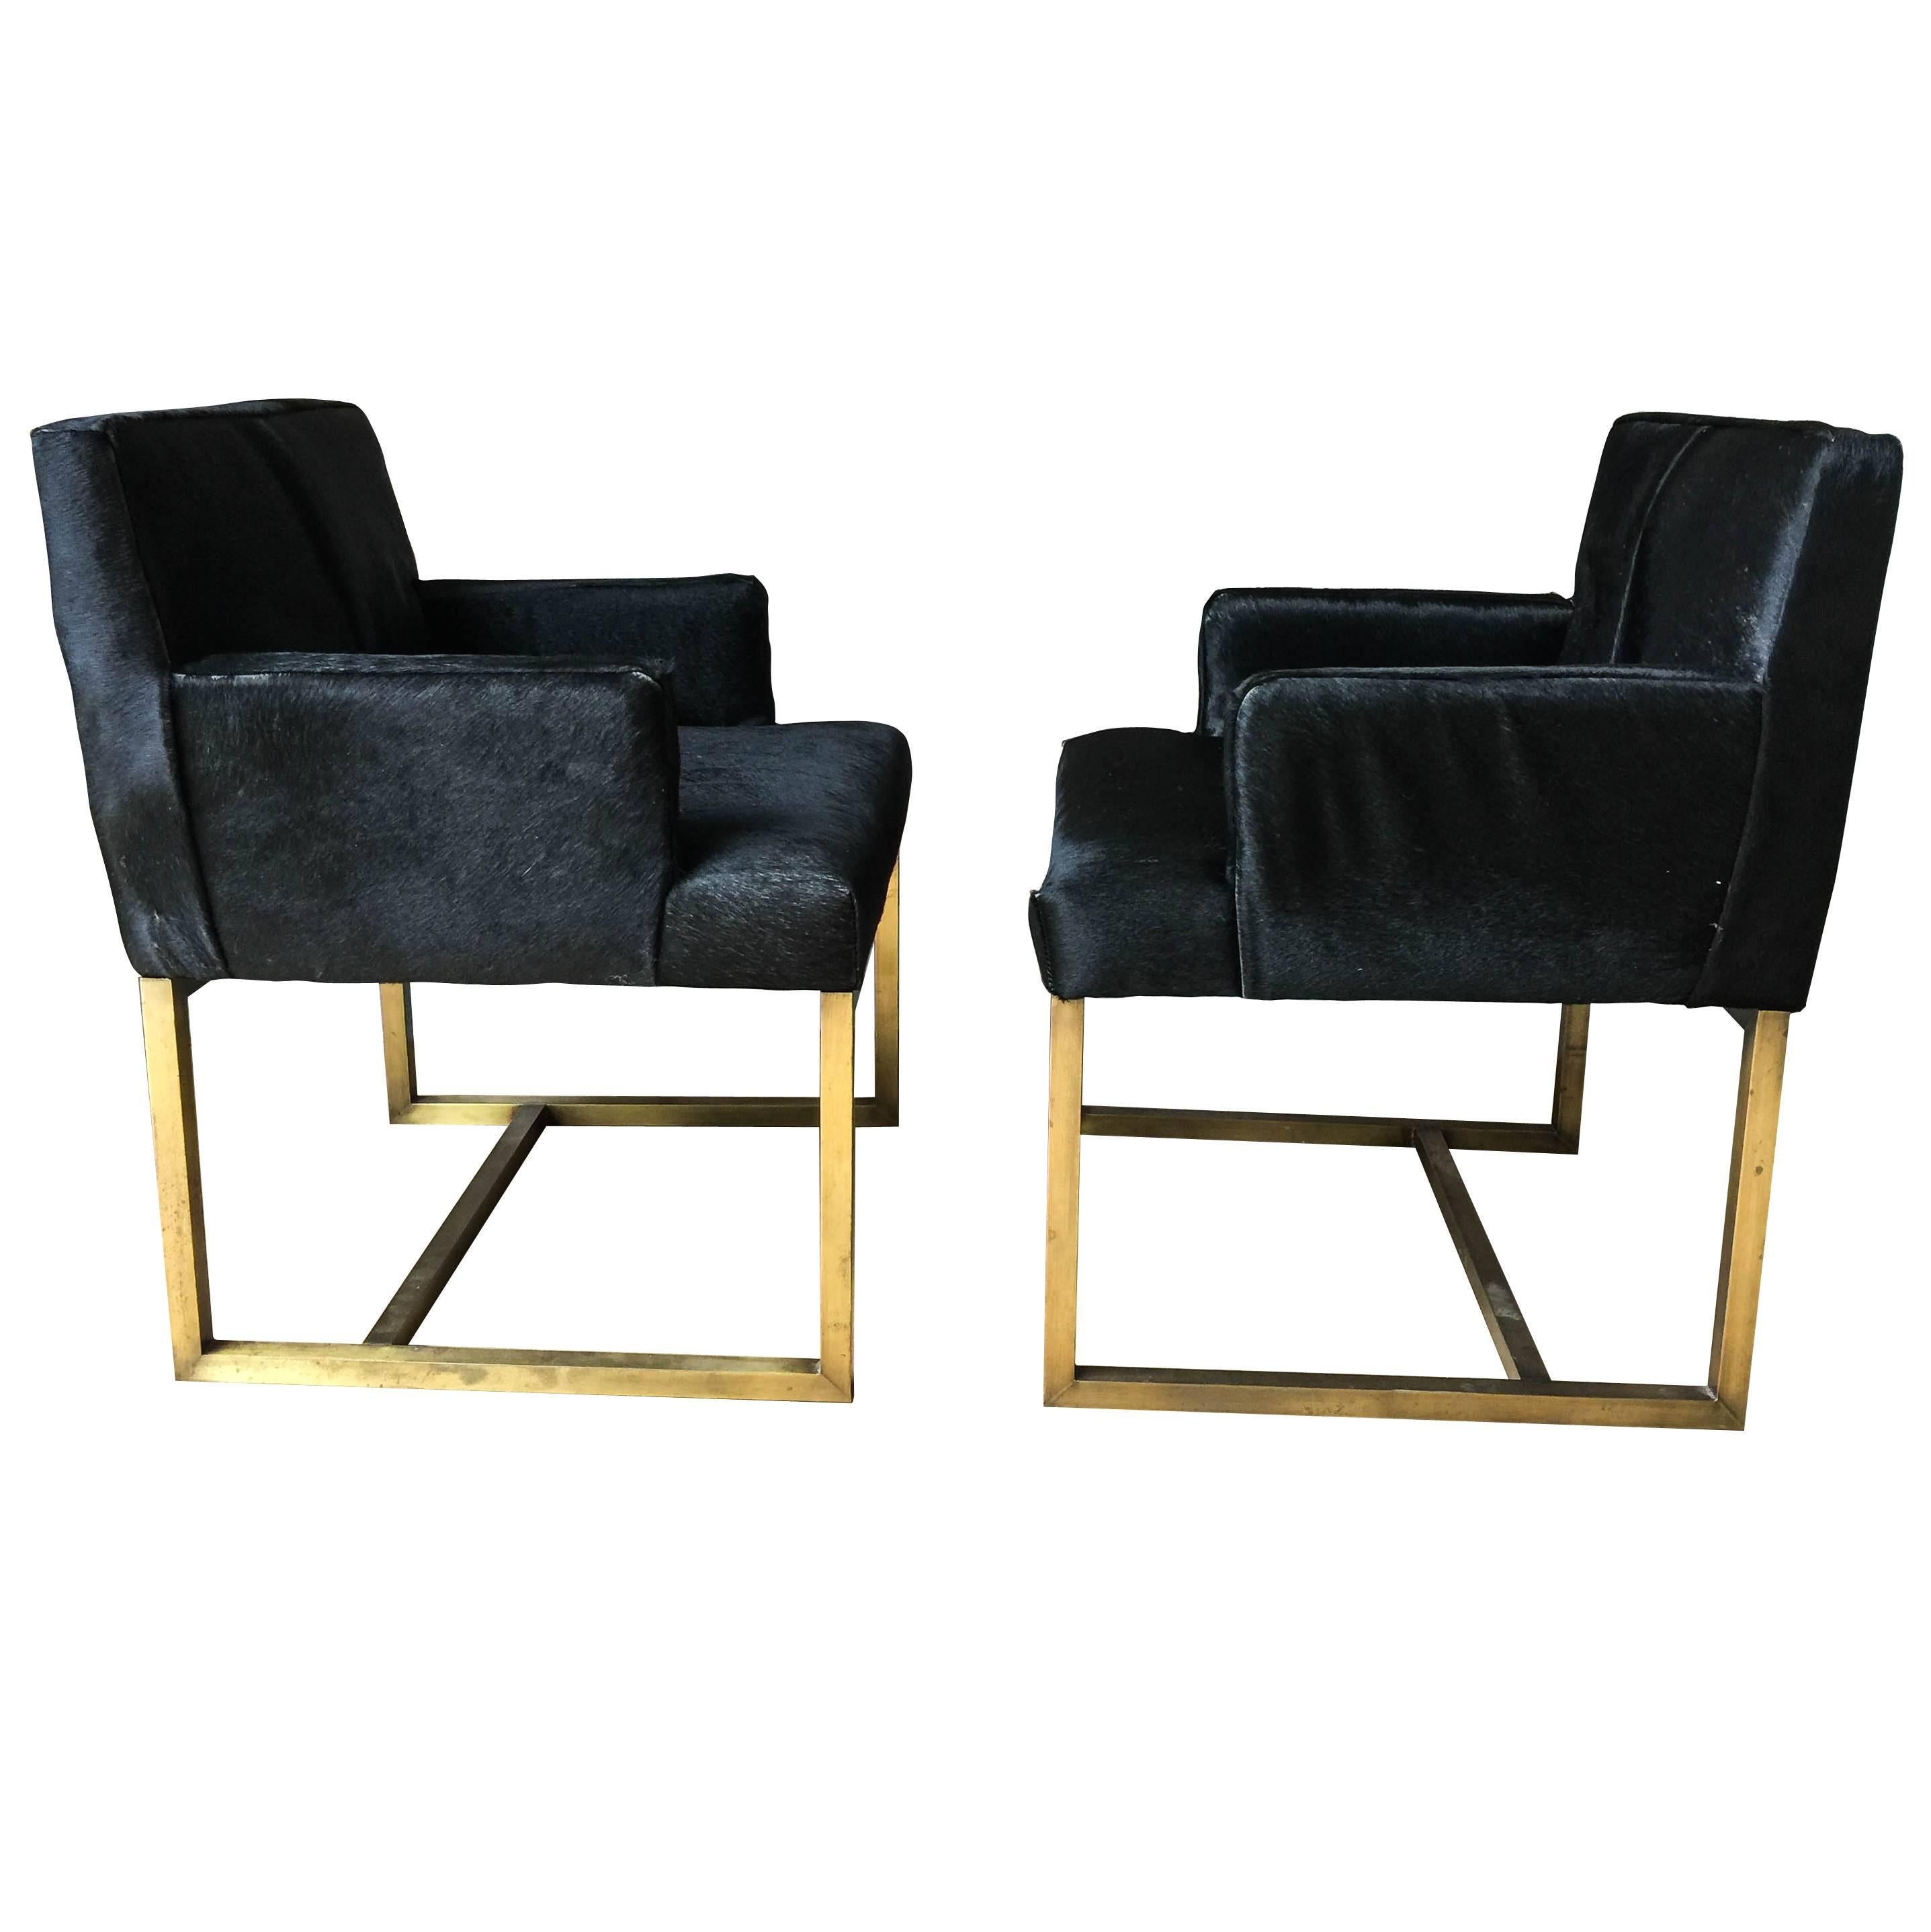 Pair of Mid-Century Swedish Brass and Black Hide Chairs